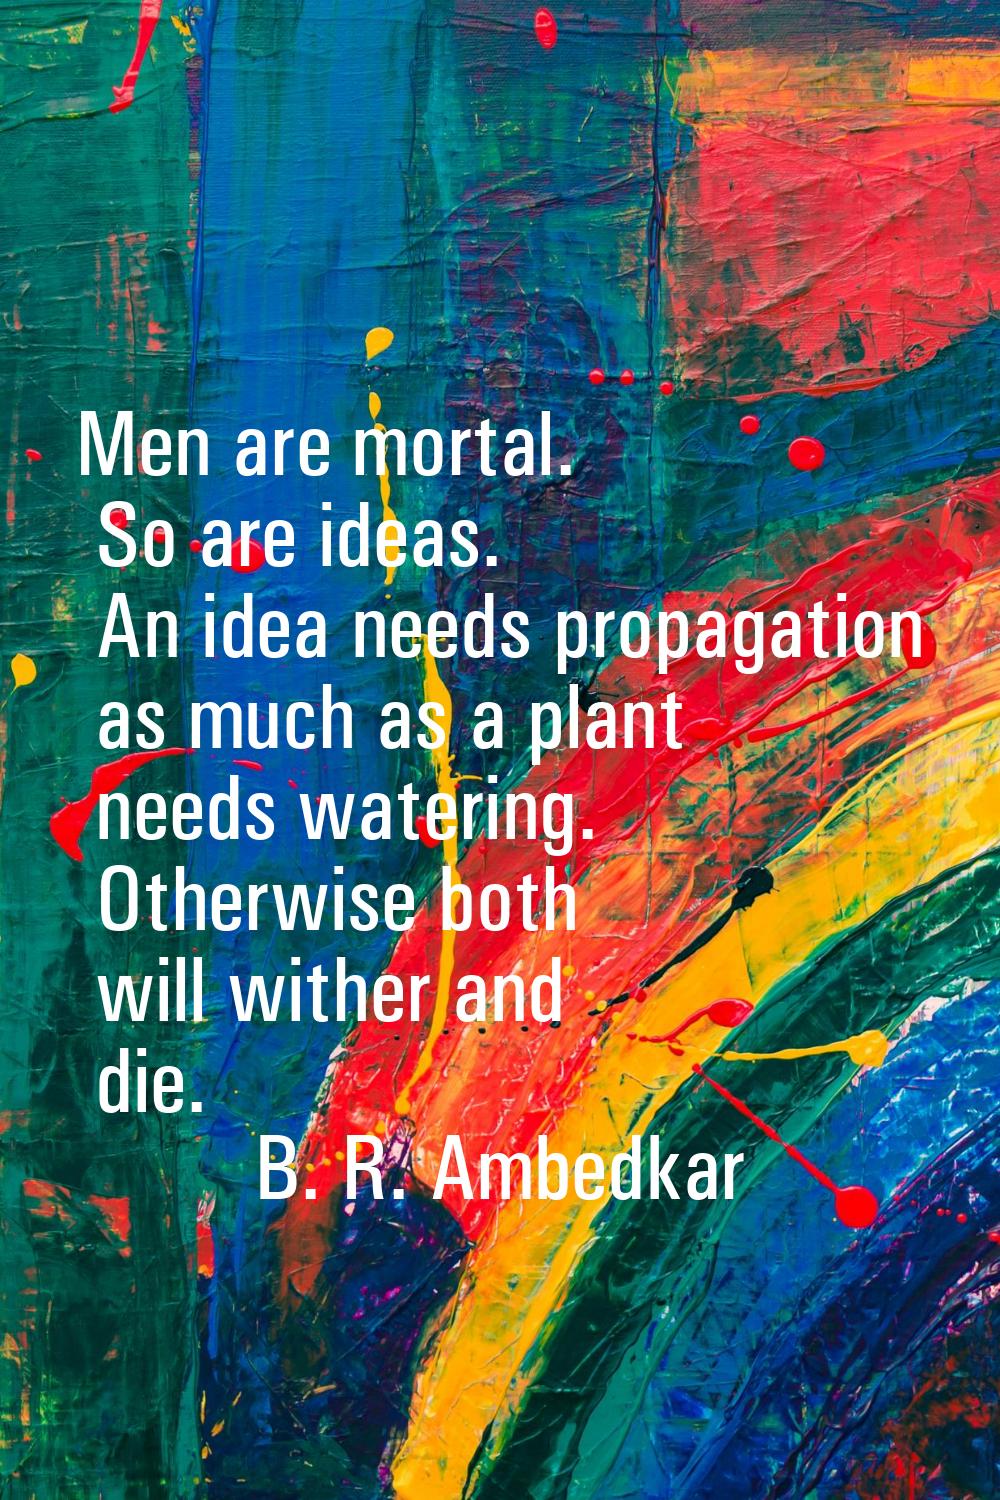 Men are mortal. So are ideas. An idea needs propagation as much as a plant needs watering. Otherwis